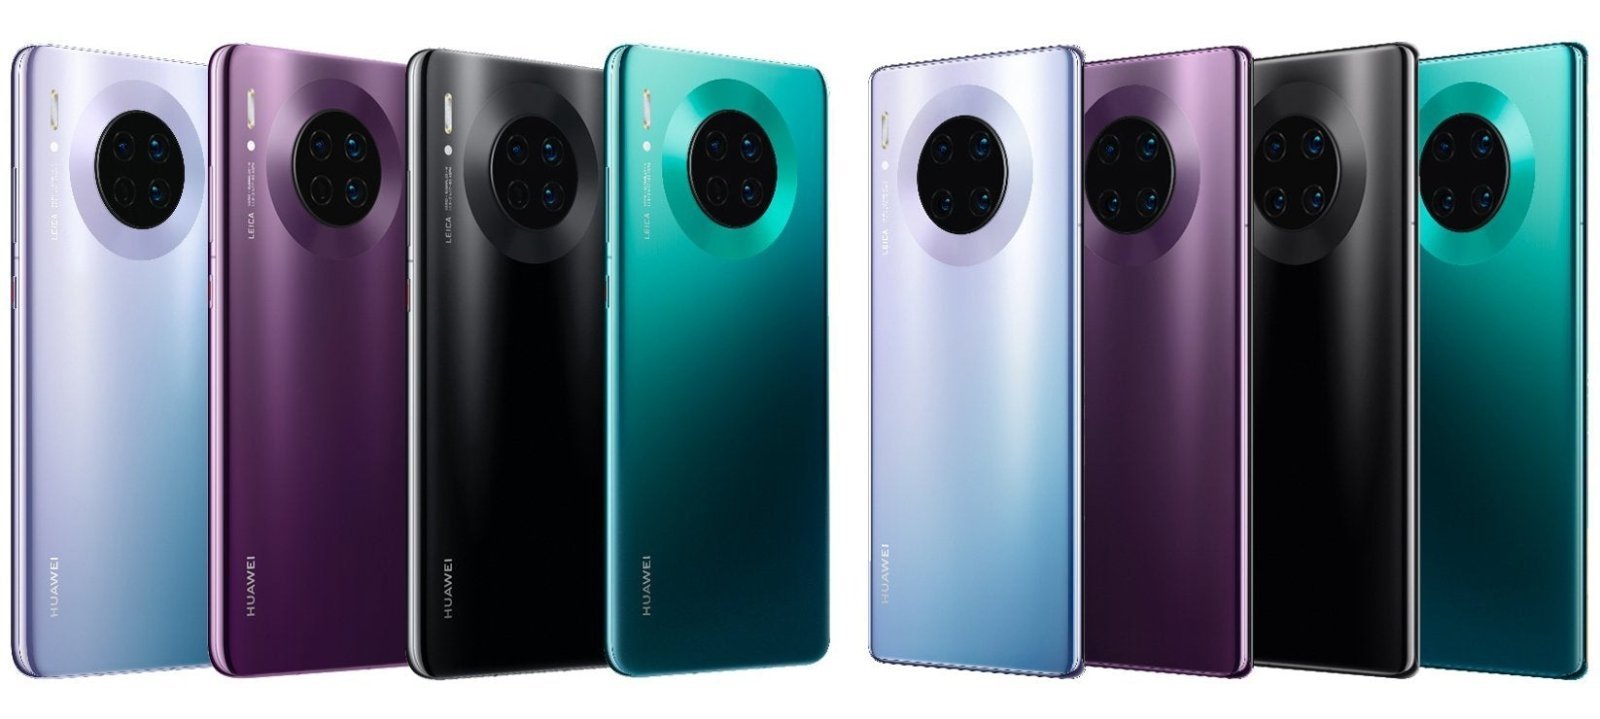 Huawei Mate 30 y Mate 30 Pro todos sus colores